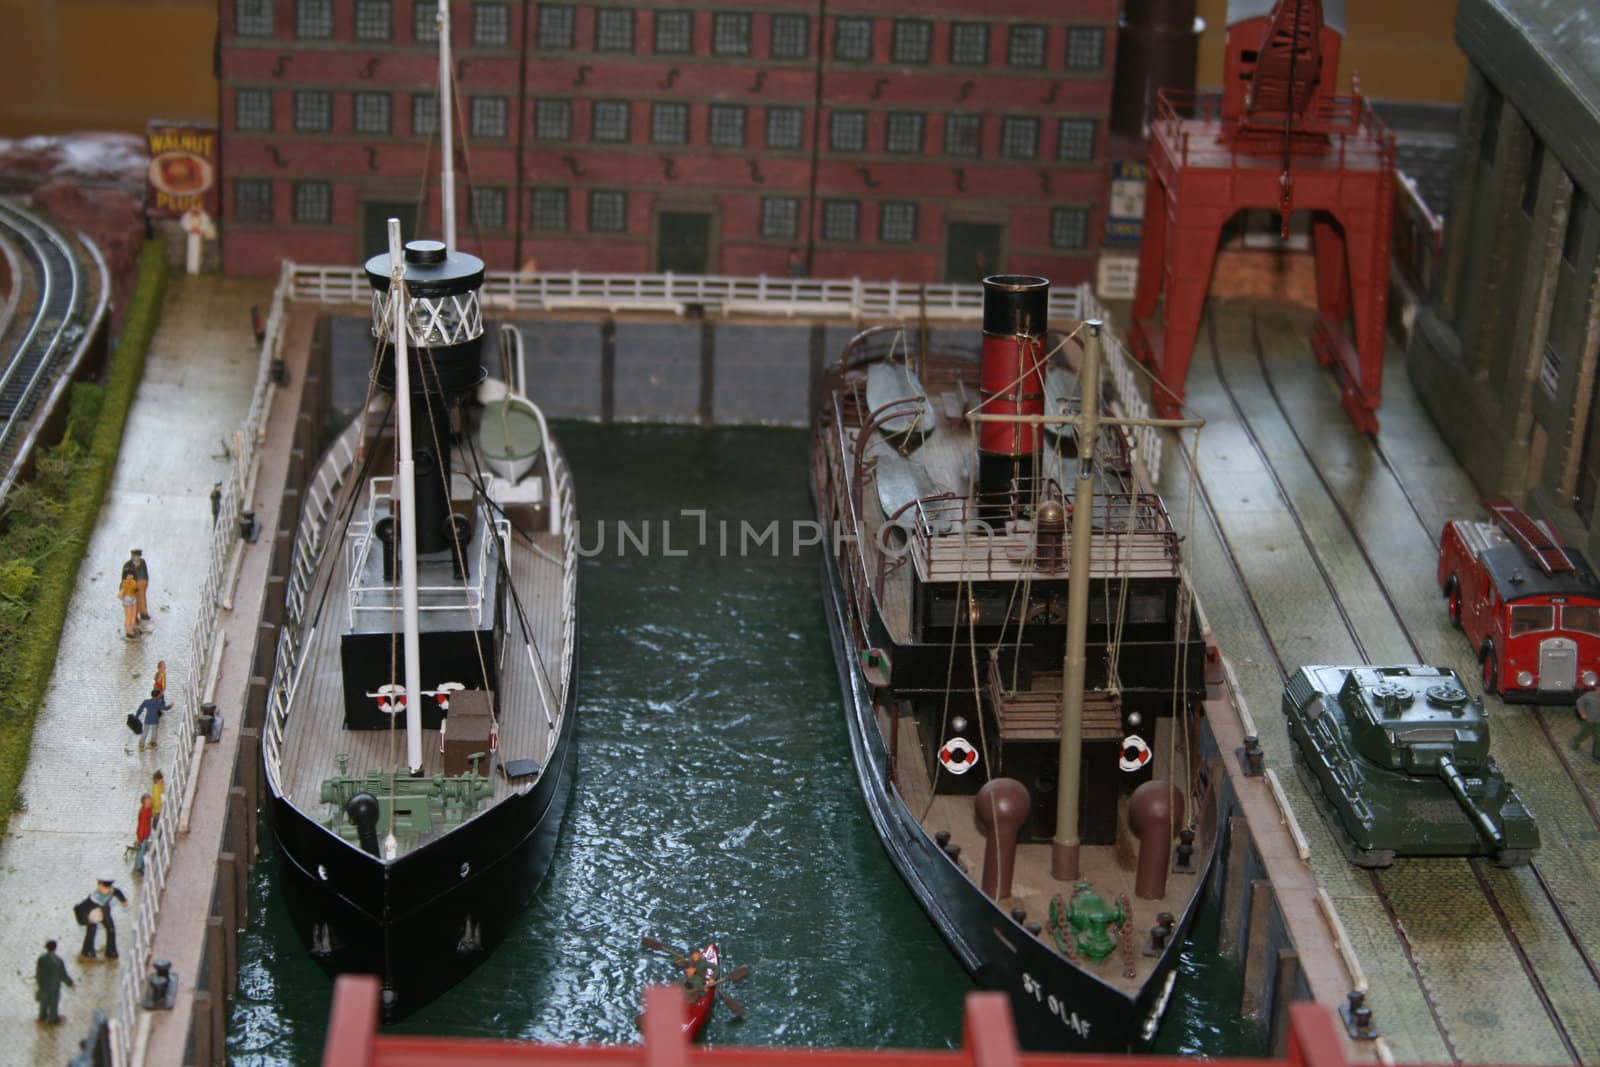 model ships and tank in a model harbour